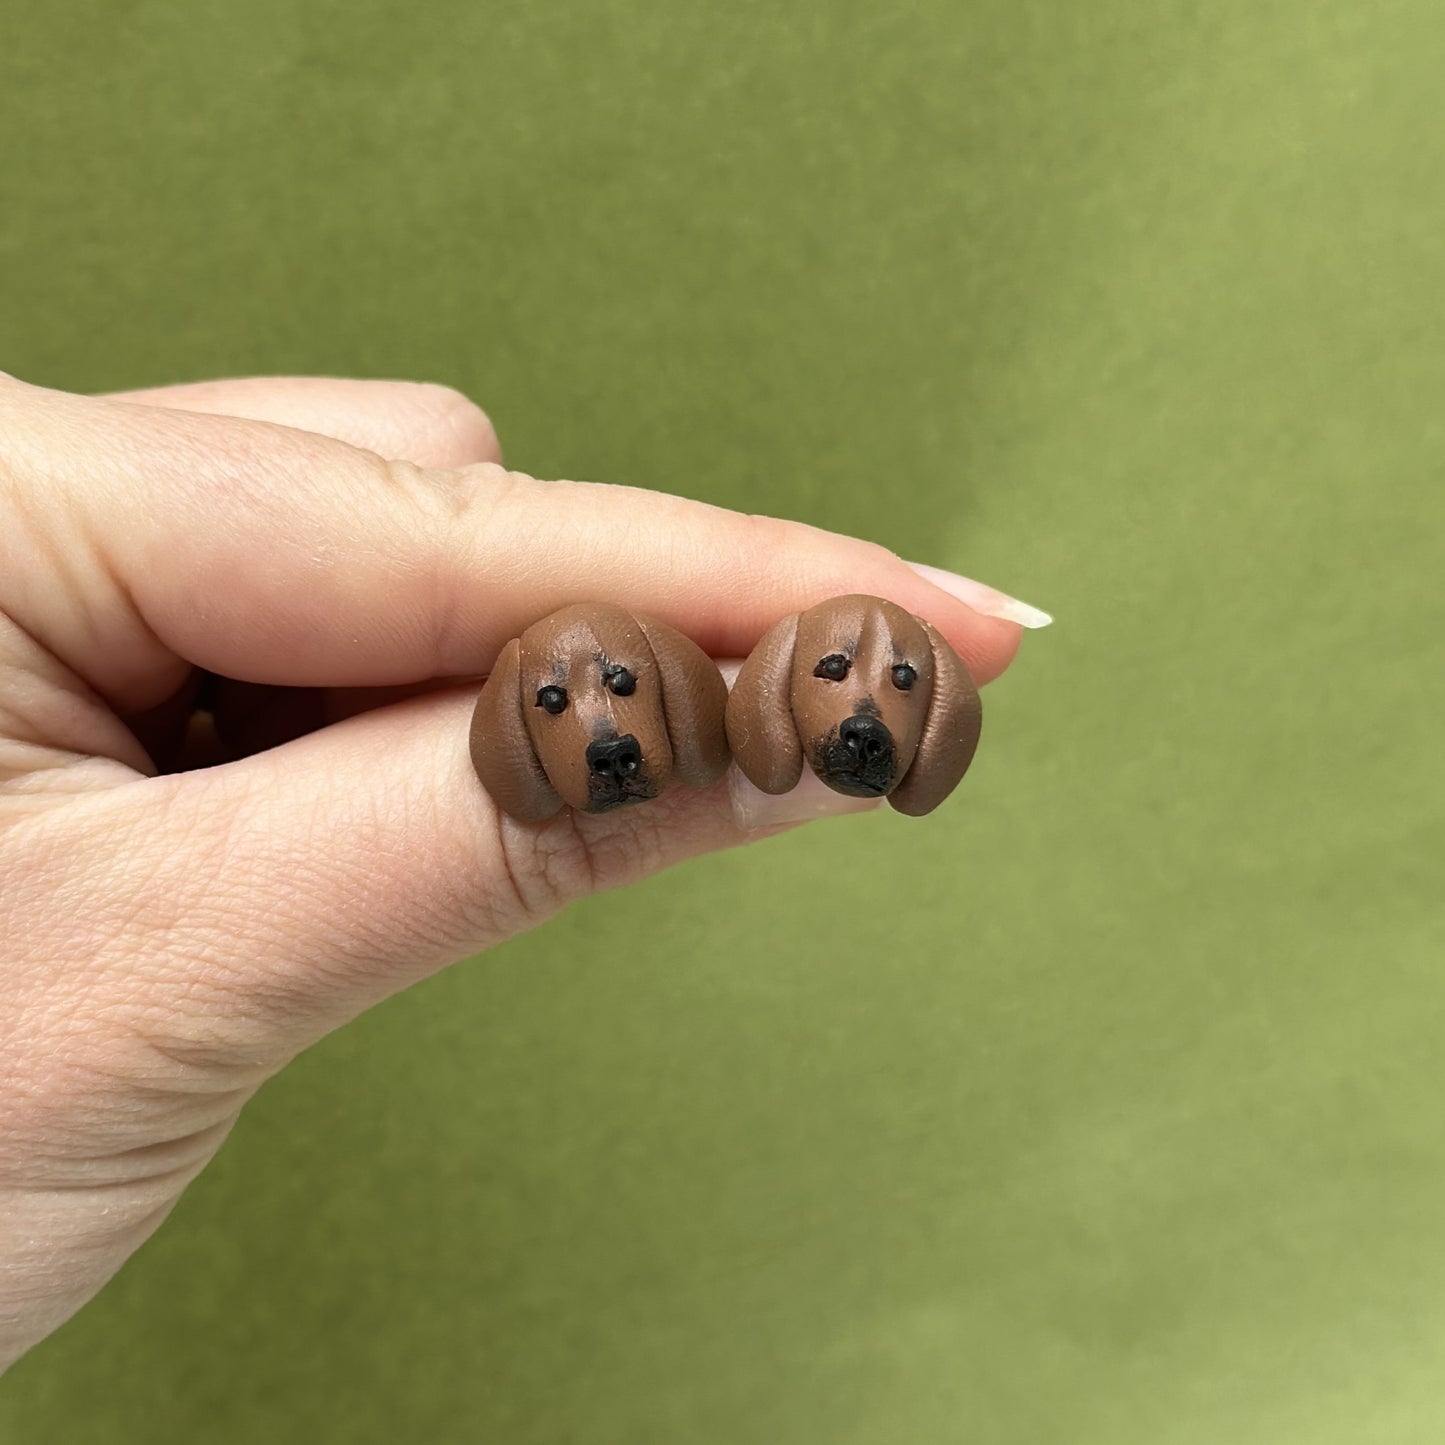 Handmade dachshund stud earrings by Pawfect Love, held over green background